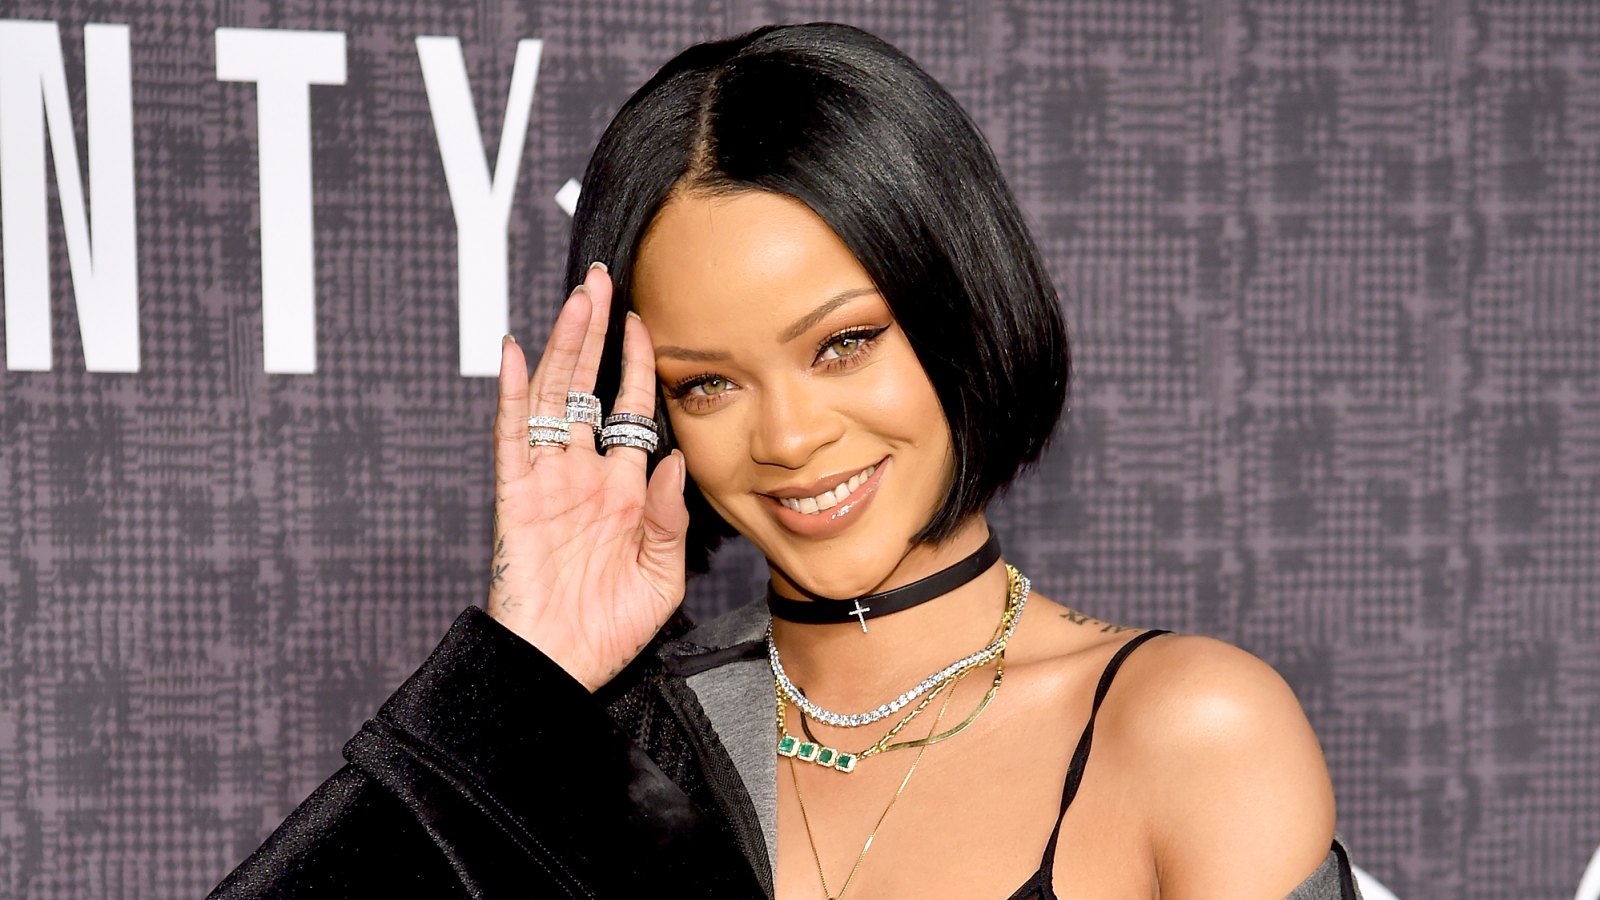 Rihanna Beauty Line: 5 Things Excited About